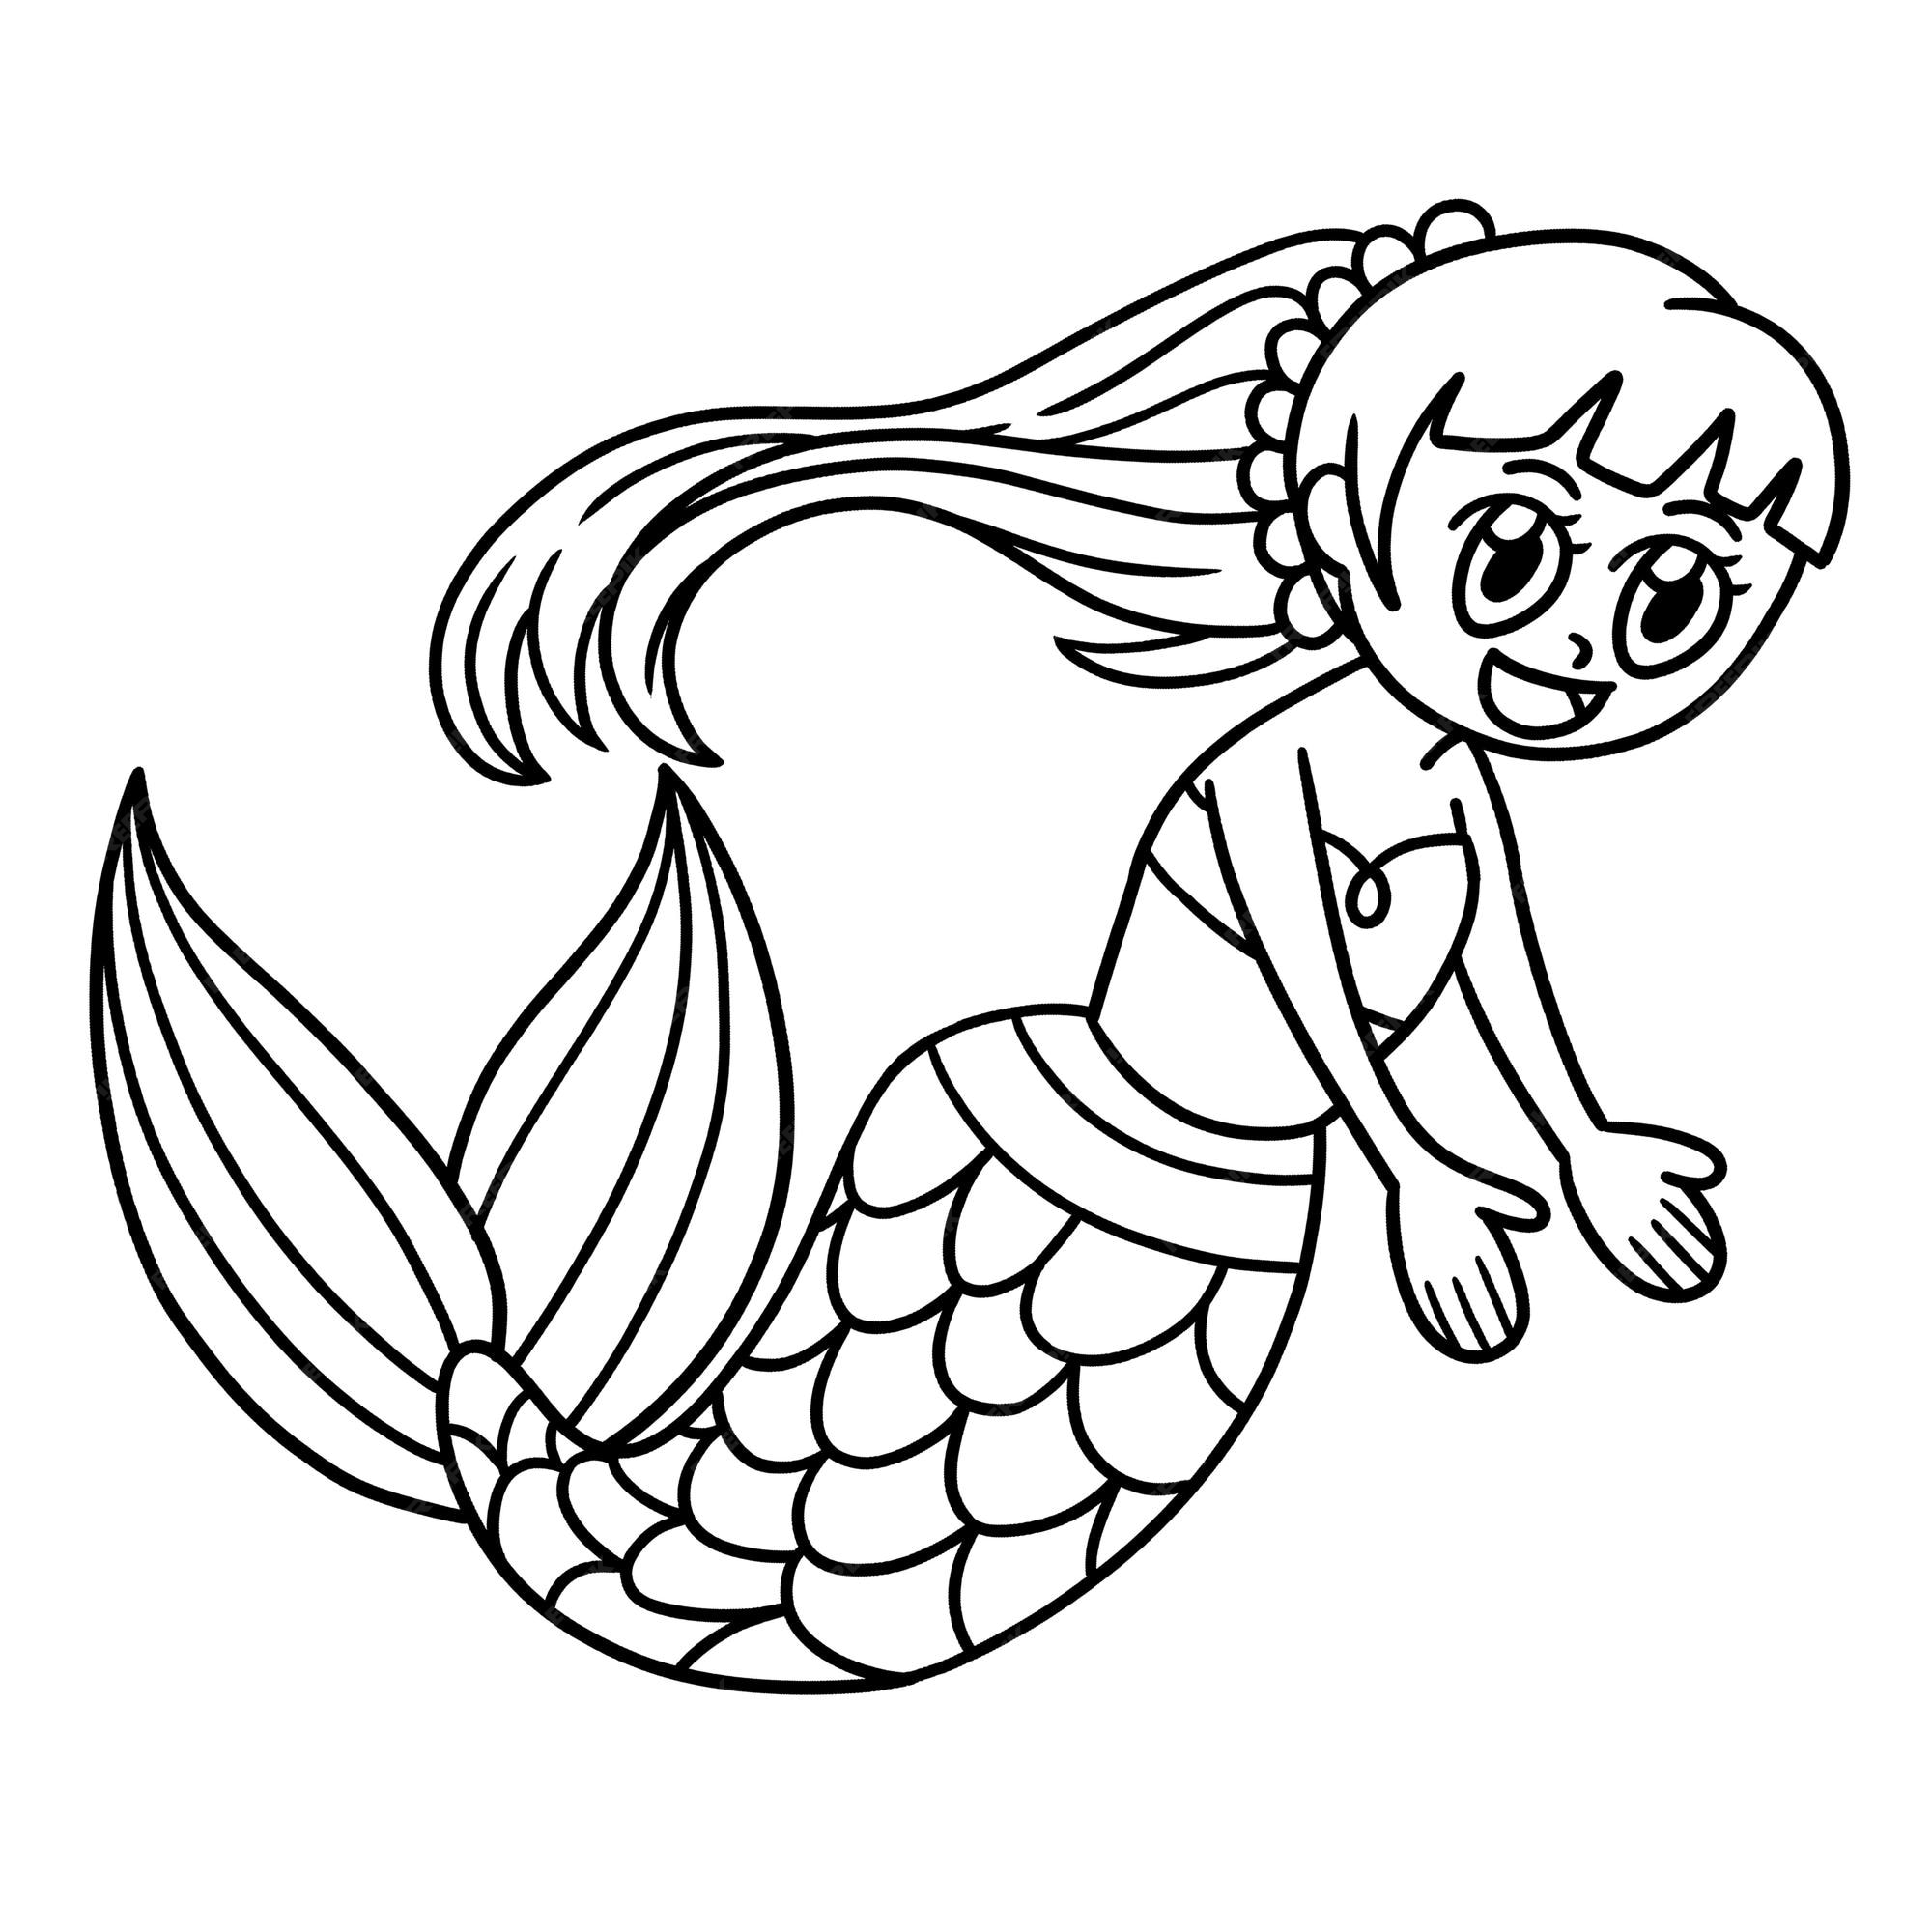 Mermaid Coloring Images   Free Vectors, Stock Photos & PSD   Page 20